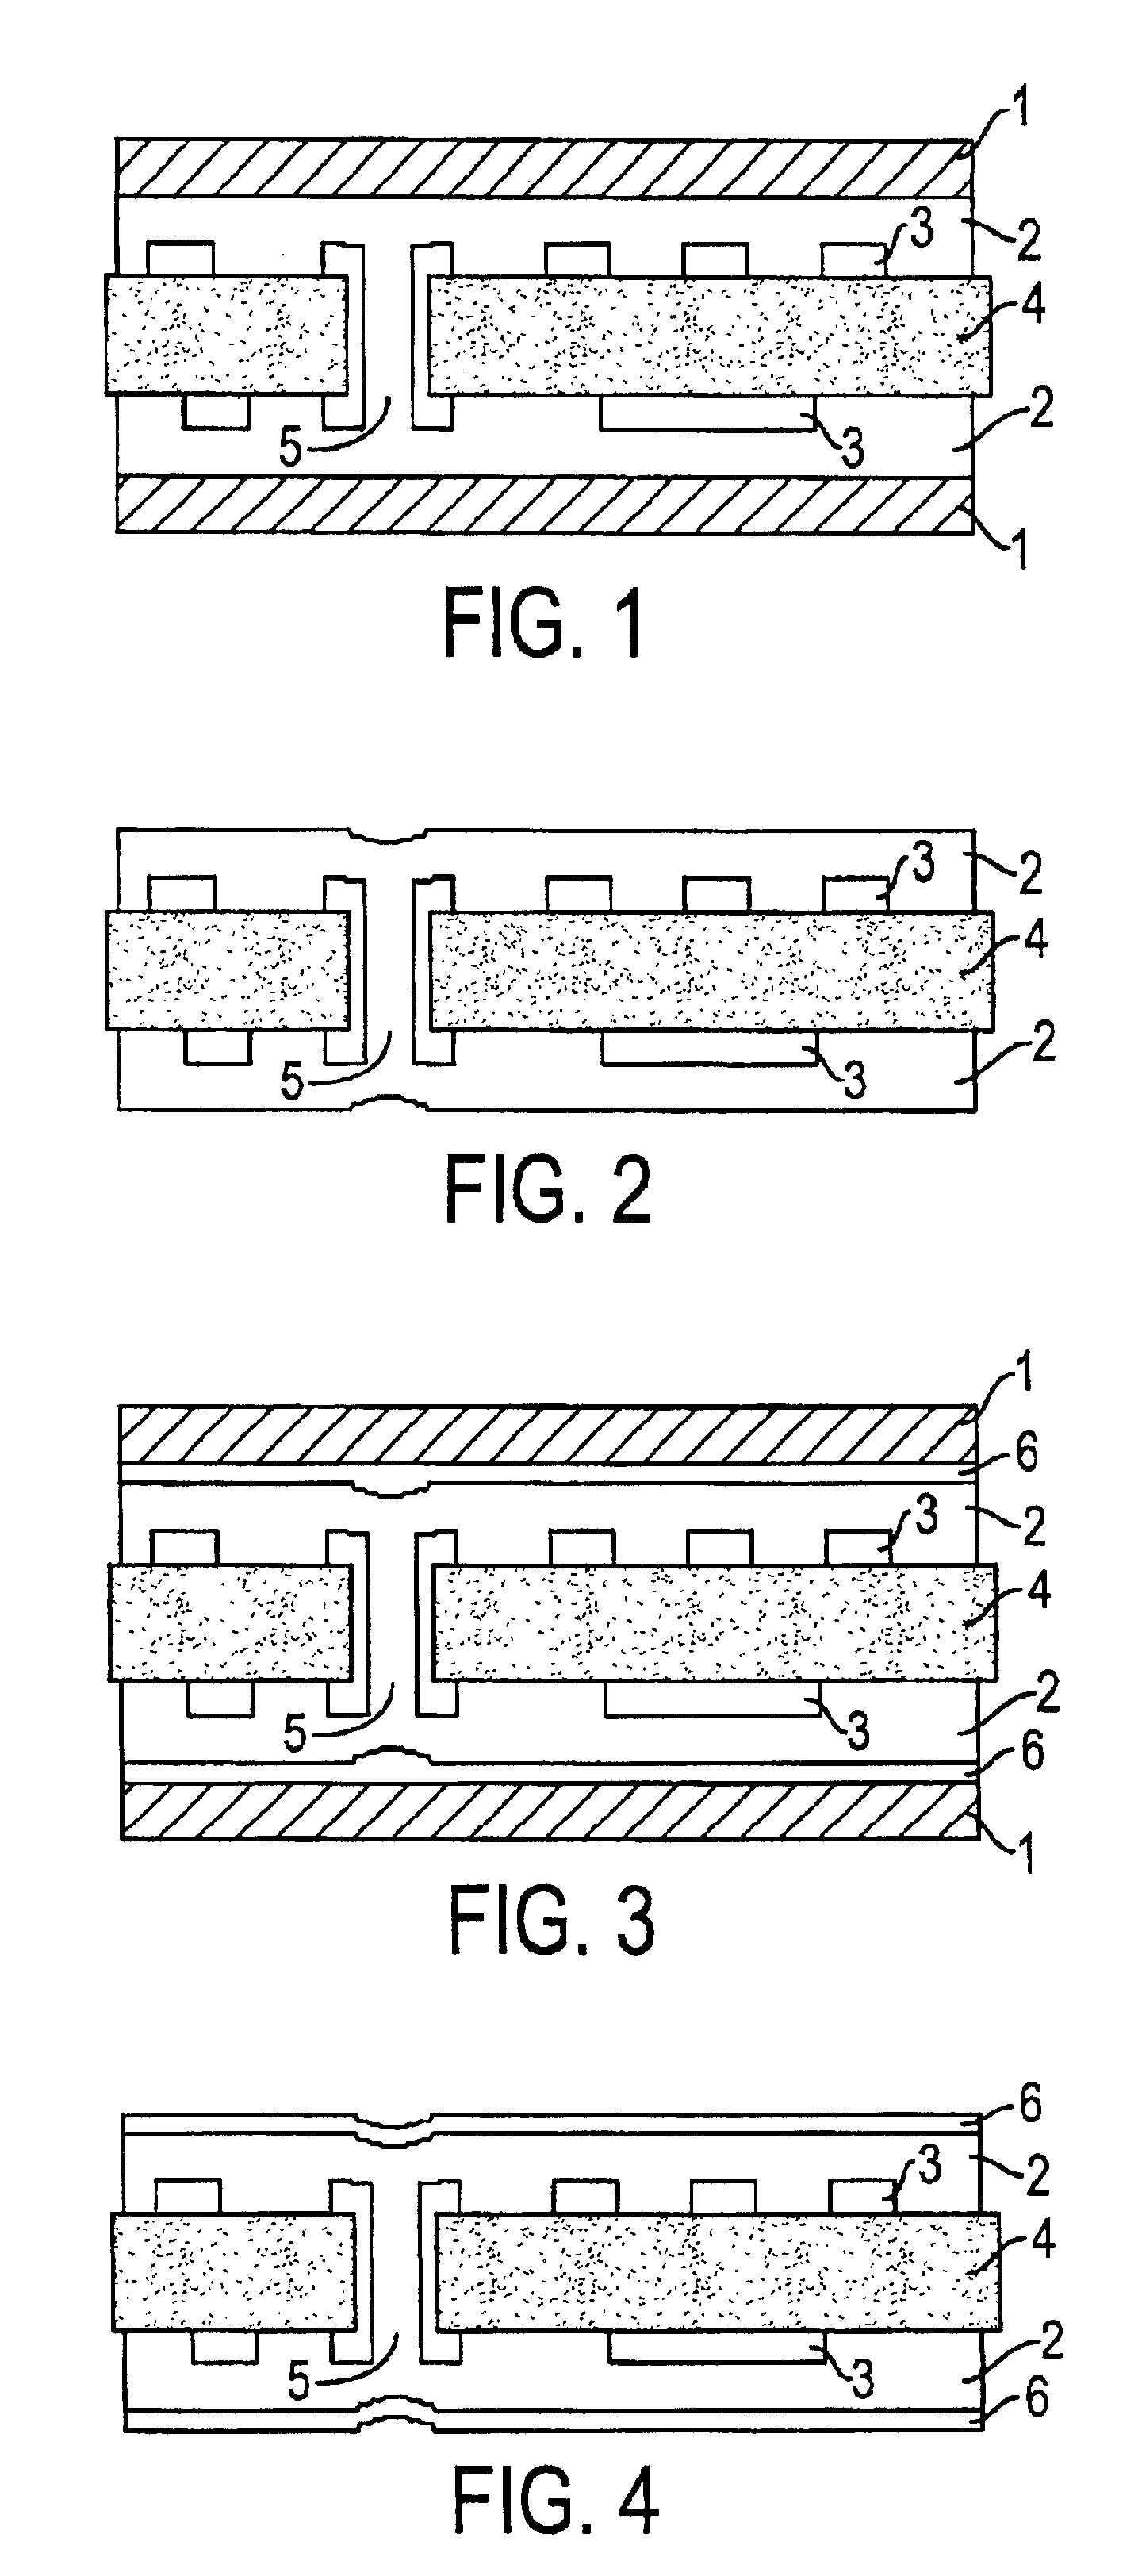 Process for producing a multi-layer printer wiring board